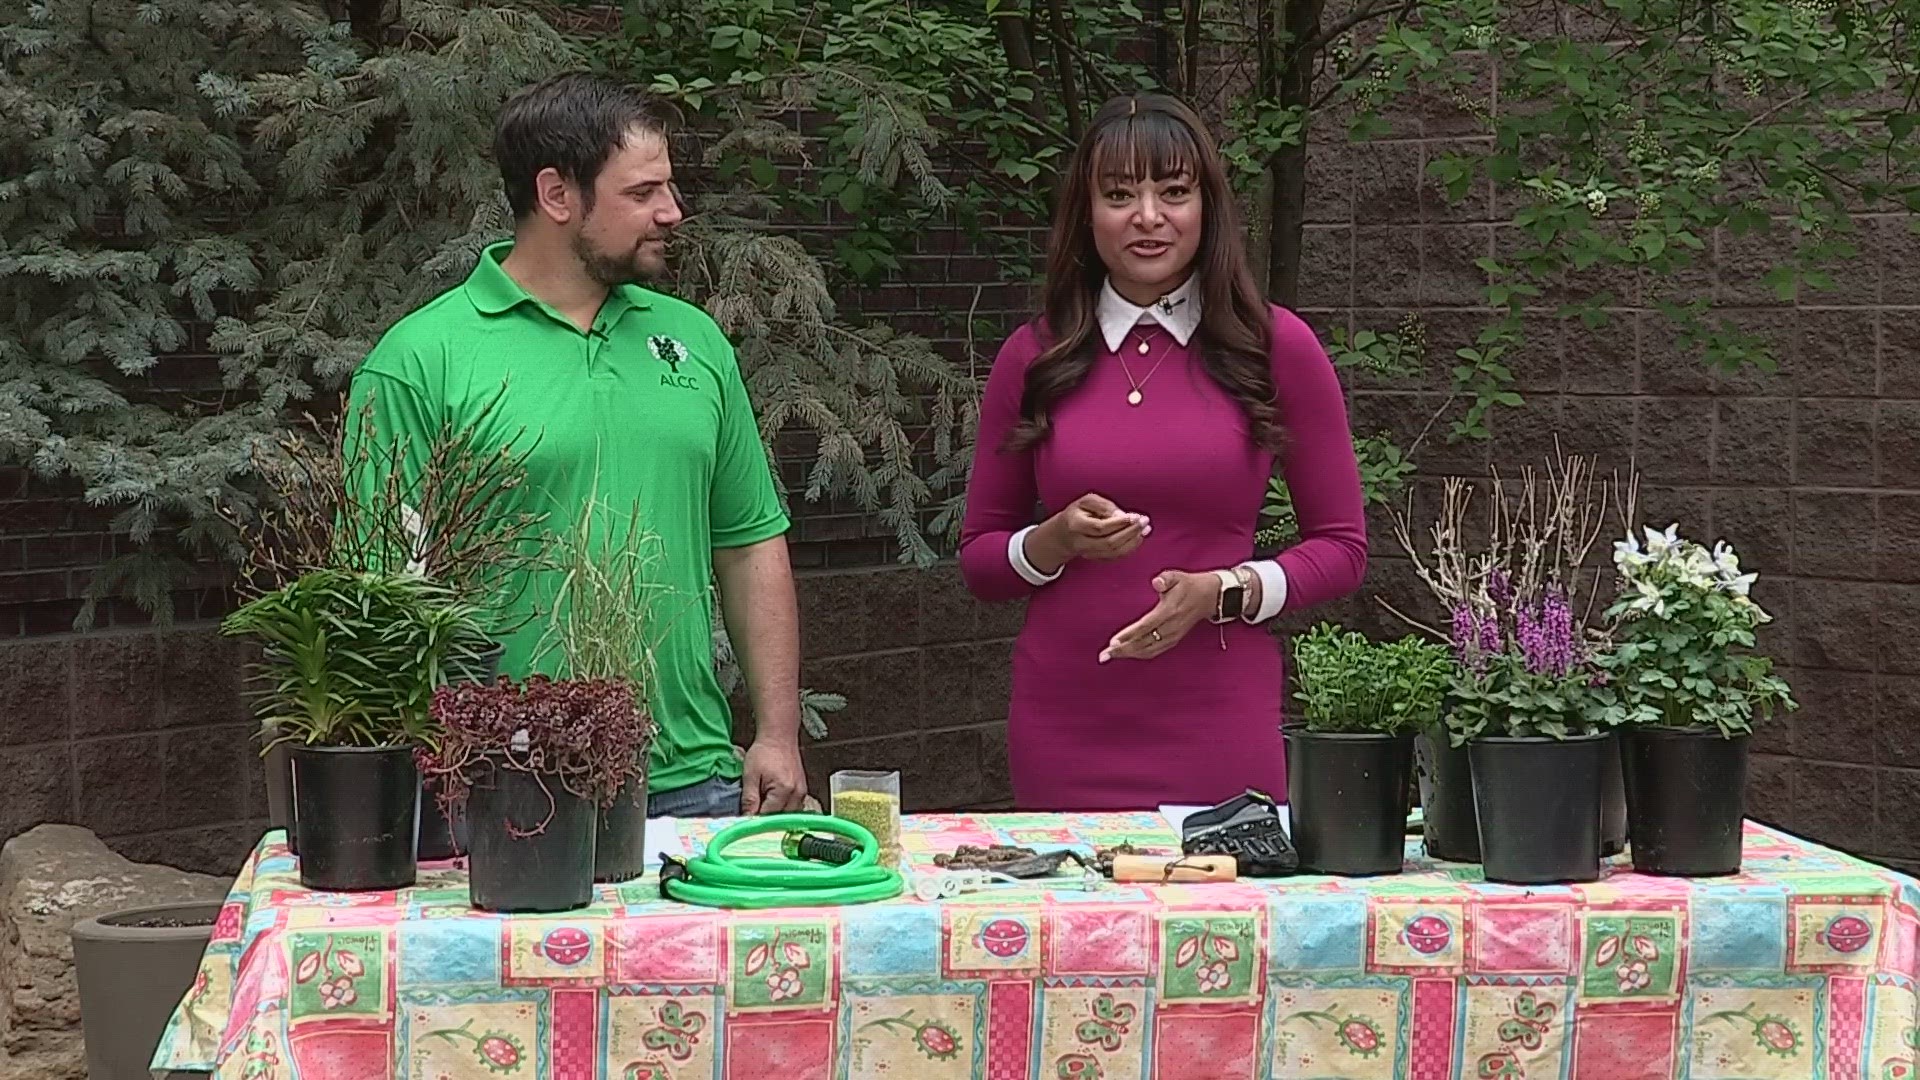 Ben Randall with the Associated Landscape Contractors of Colorado is here to review some items for starting your landscape right.